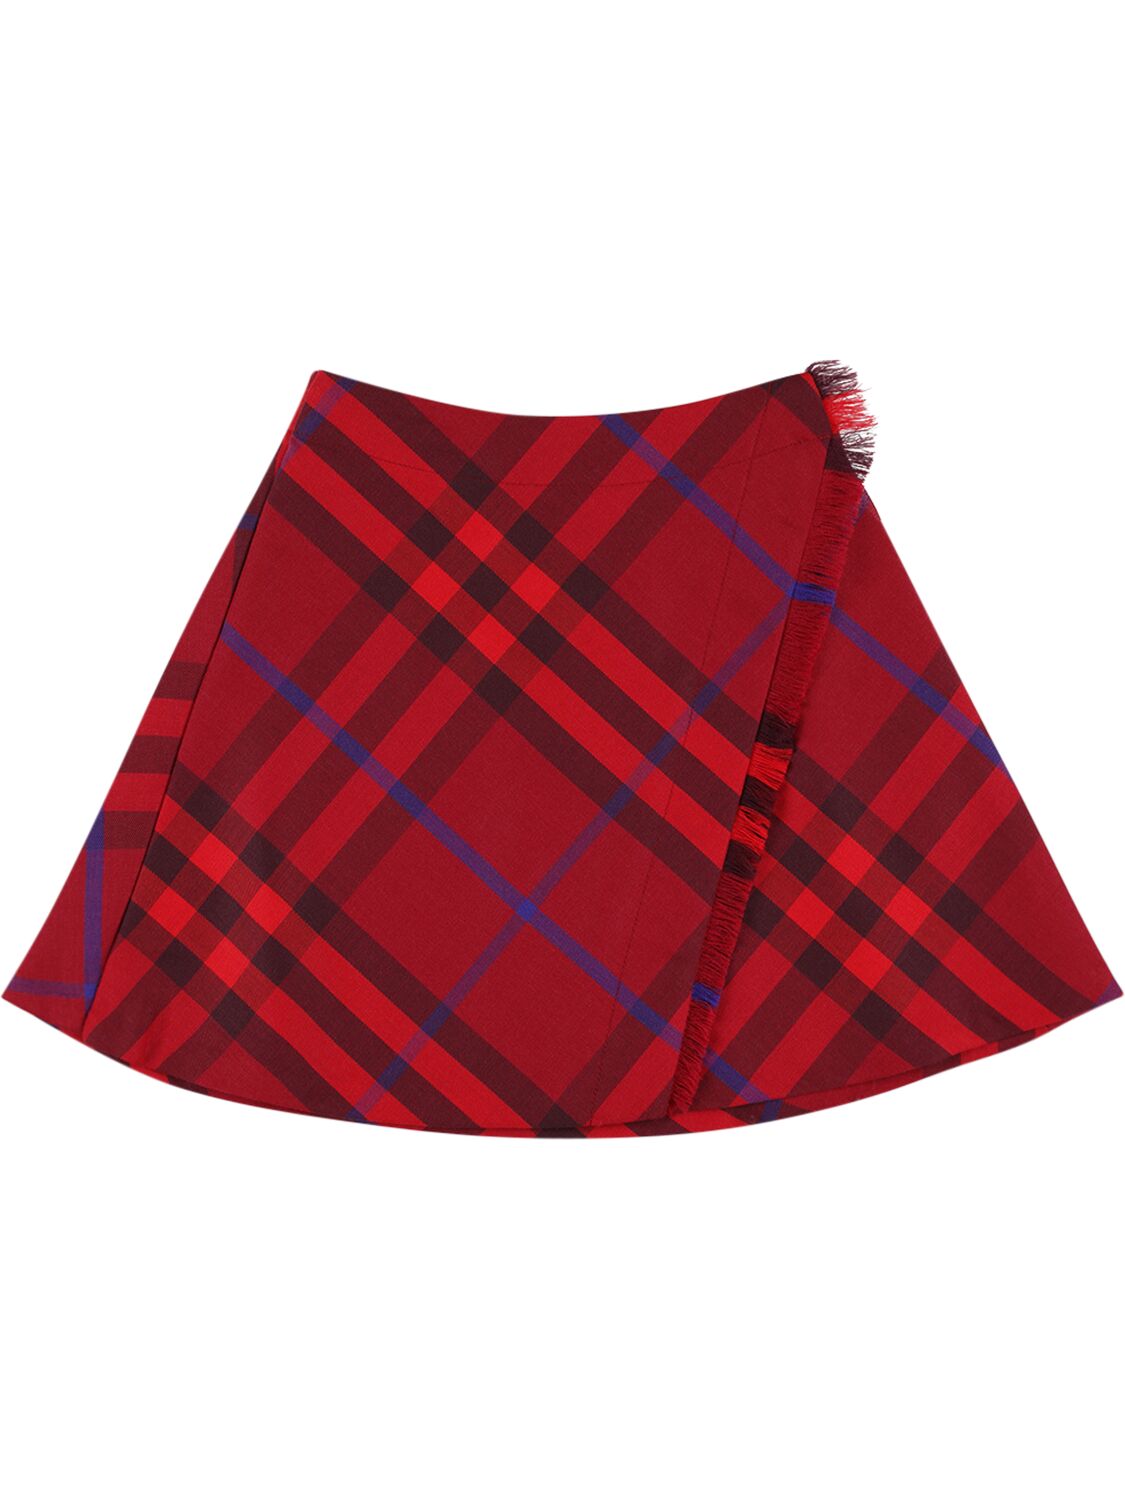 Image of Check Print Pleated Wool Skirt